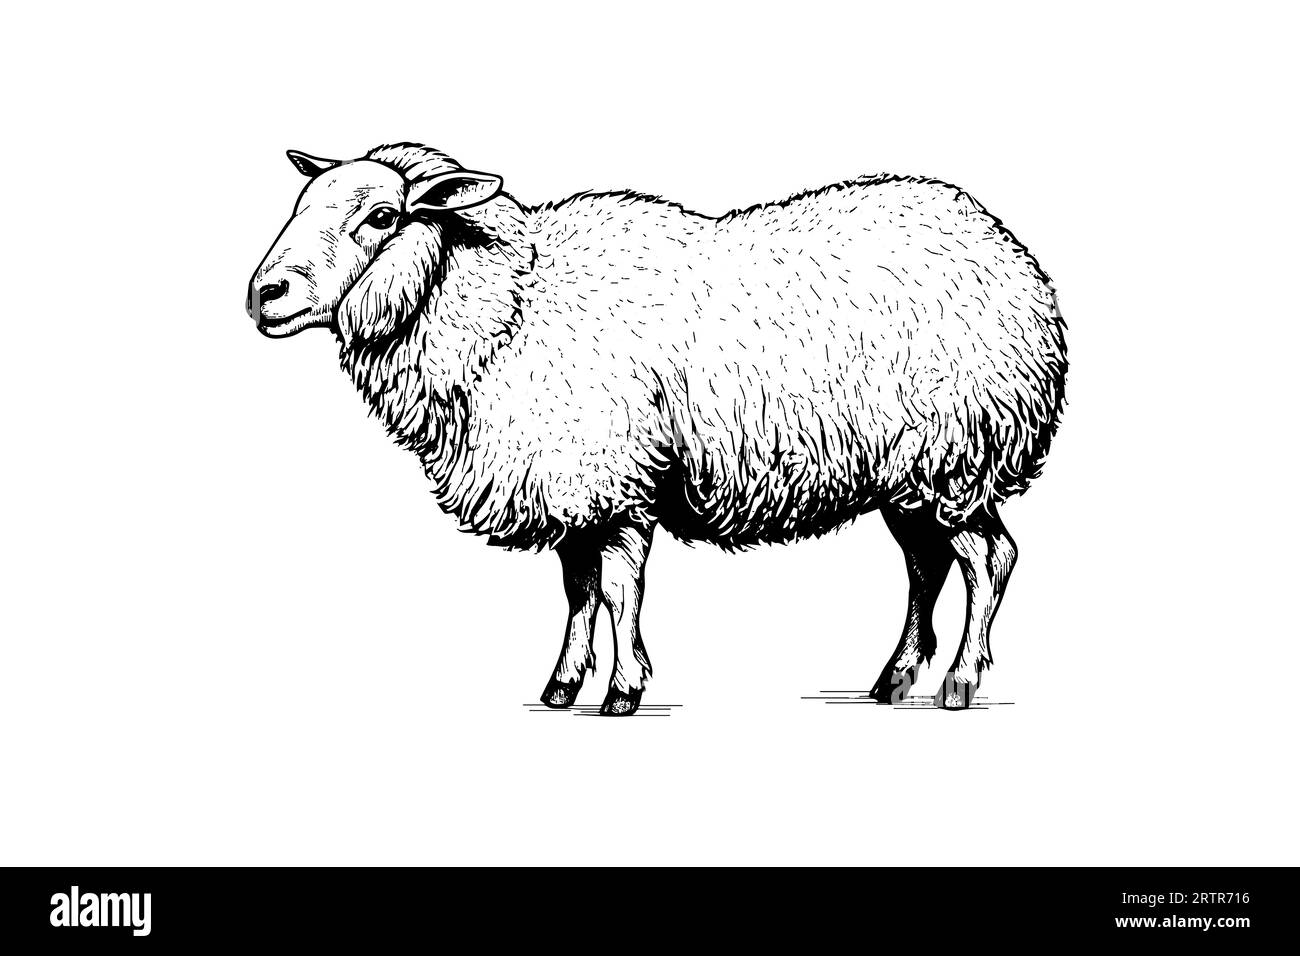 Cute sheep or lamb engraving style vector illustration. Realistic image. Stock Vector